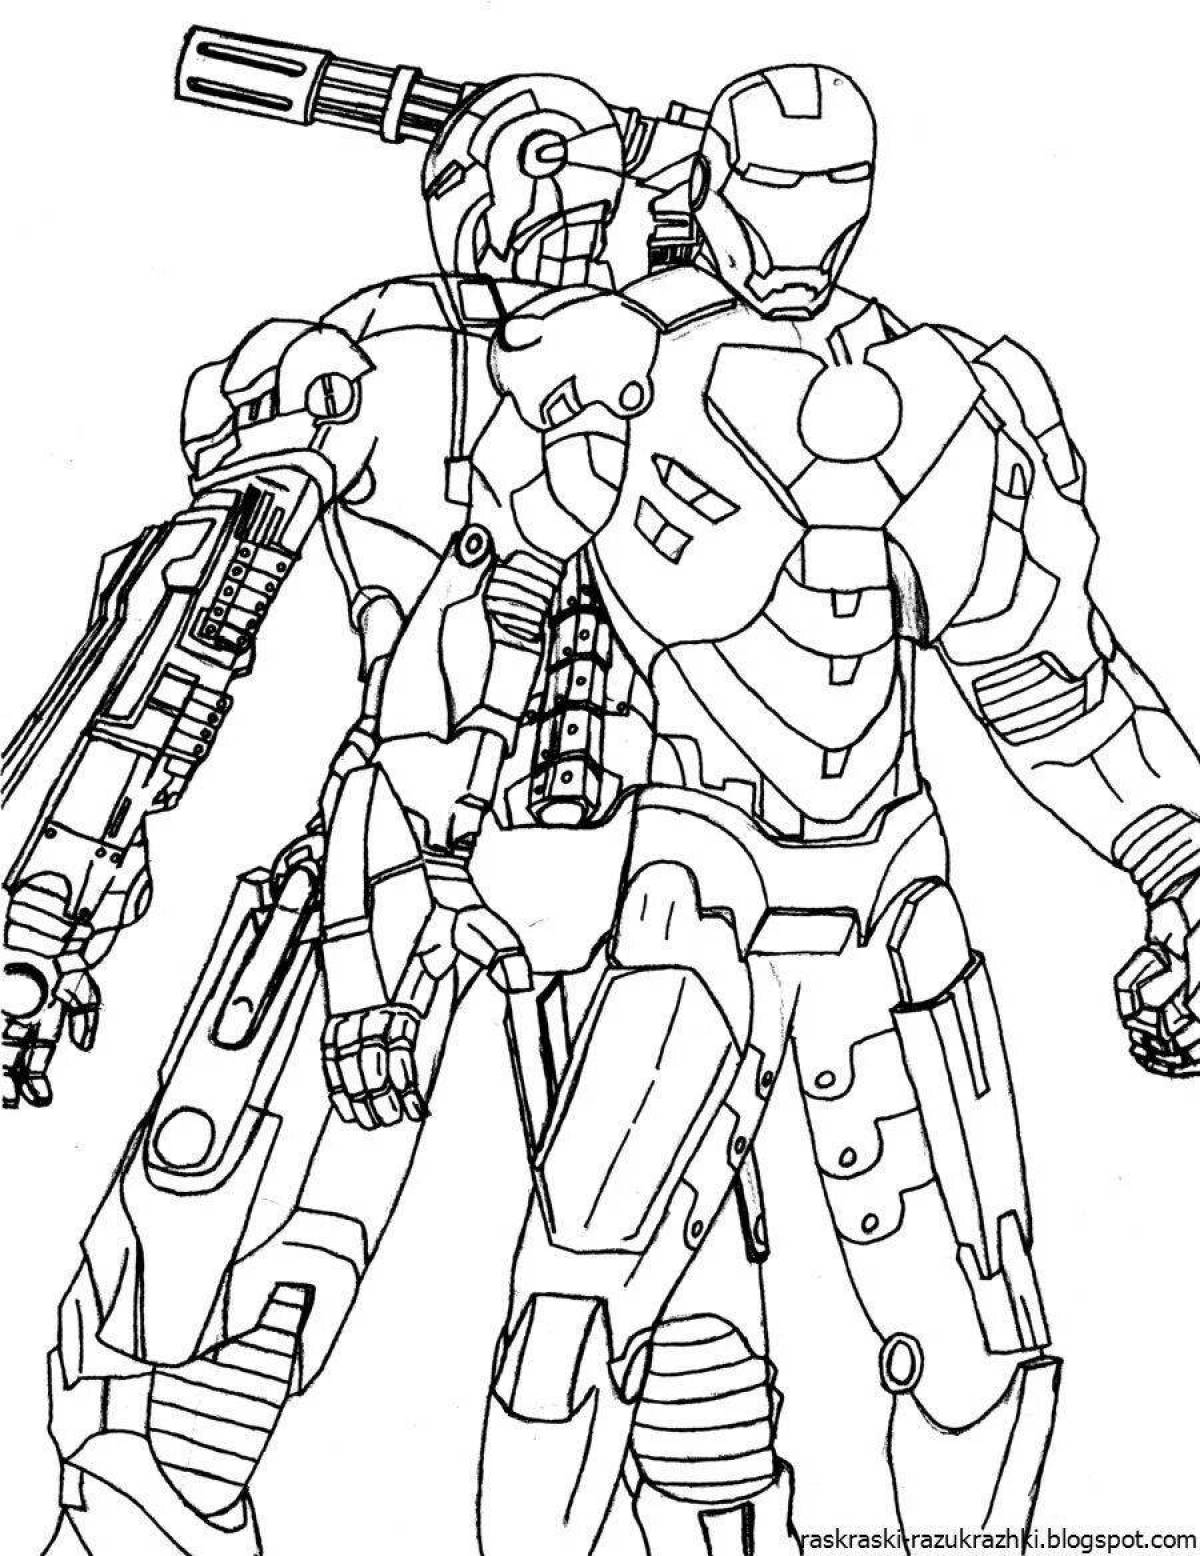 Colorfully detailed iron patriot coloring book